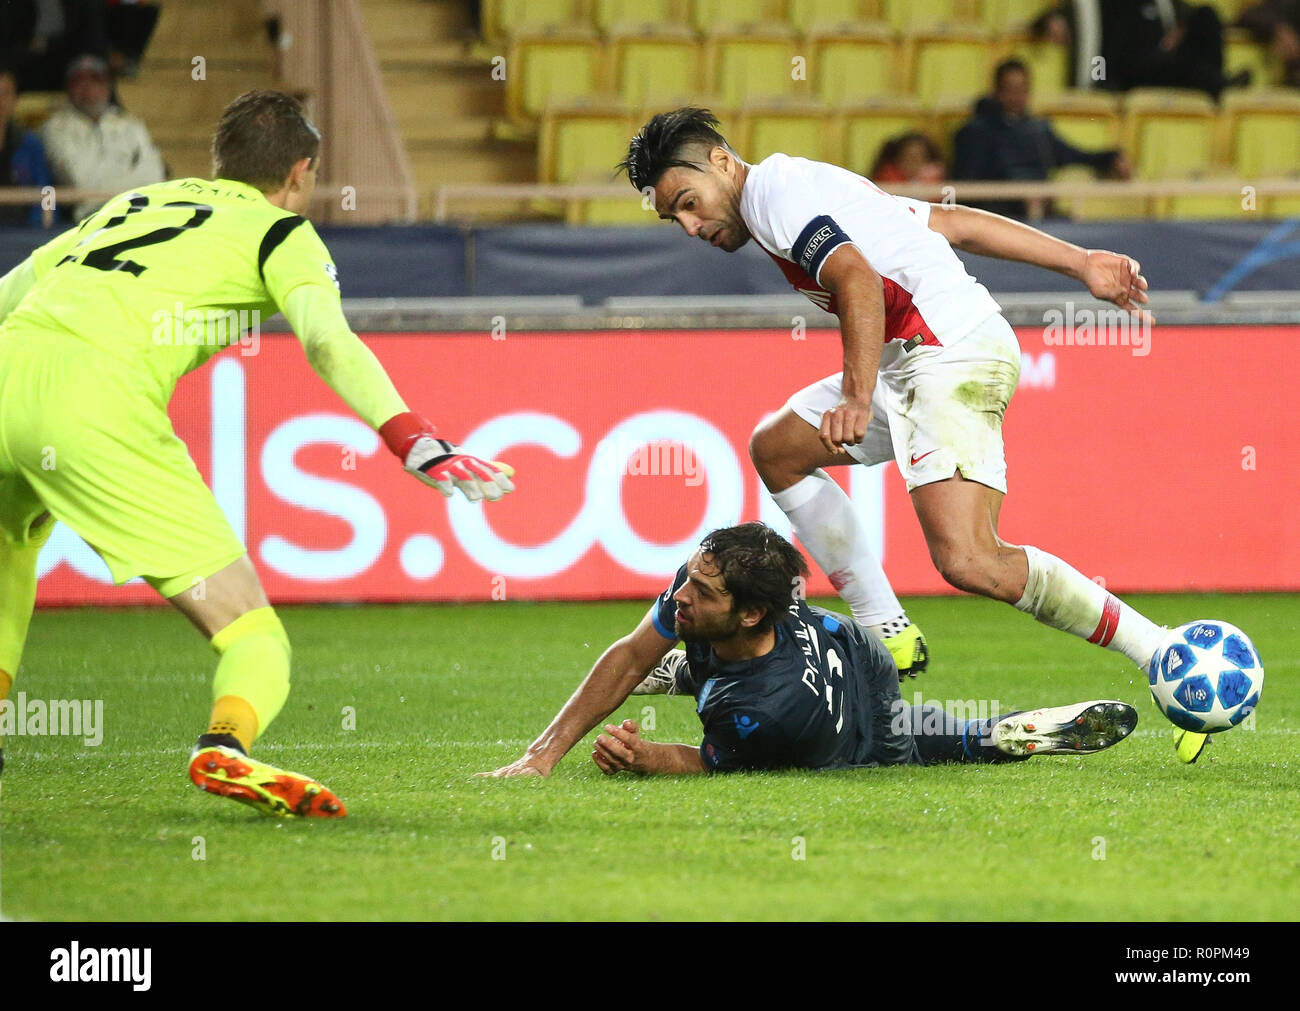 Fontvieille. 6th Nov, 2018. Rezaei Kaveh (Bottom) and goalkeeper Ethan Horvath (L) of Brugge vie with Radamel Falcao of Monaco during the UEFA Champions League group A match between Monaco and Club Brugge in Fontvieille, Monaco on Nov. 6, 2018. Brugge won 4-0. Credit: Serge Haouzi/Xinhua/Alamy Live News Stock Photo